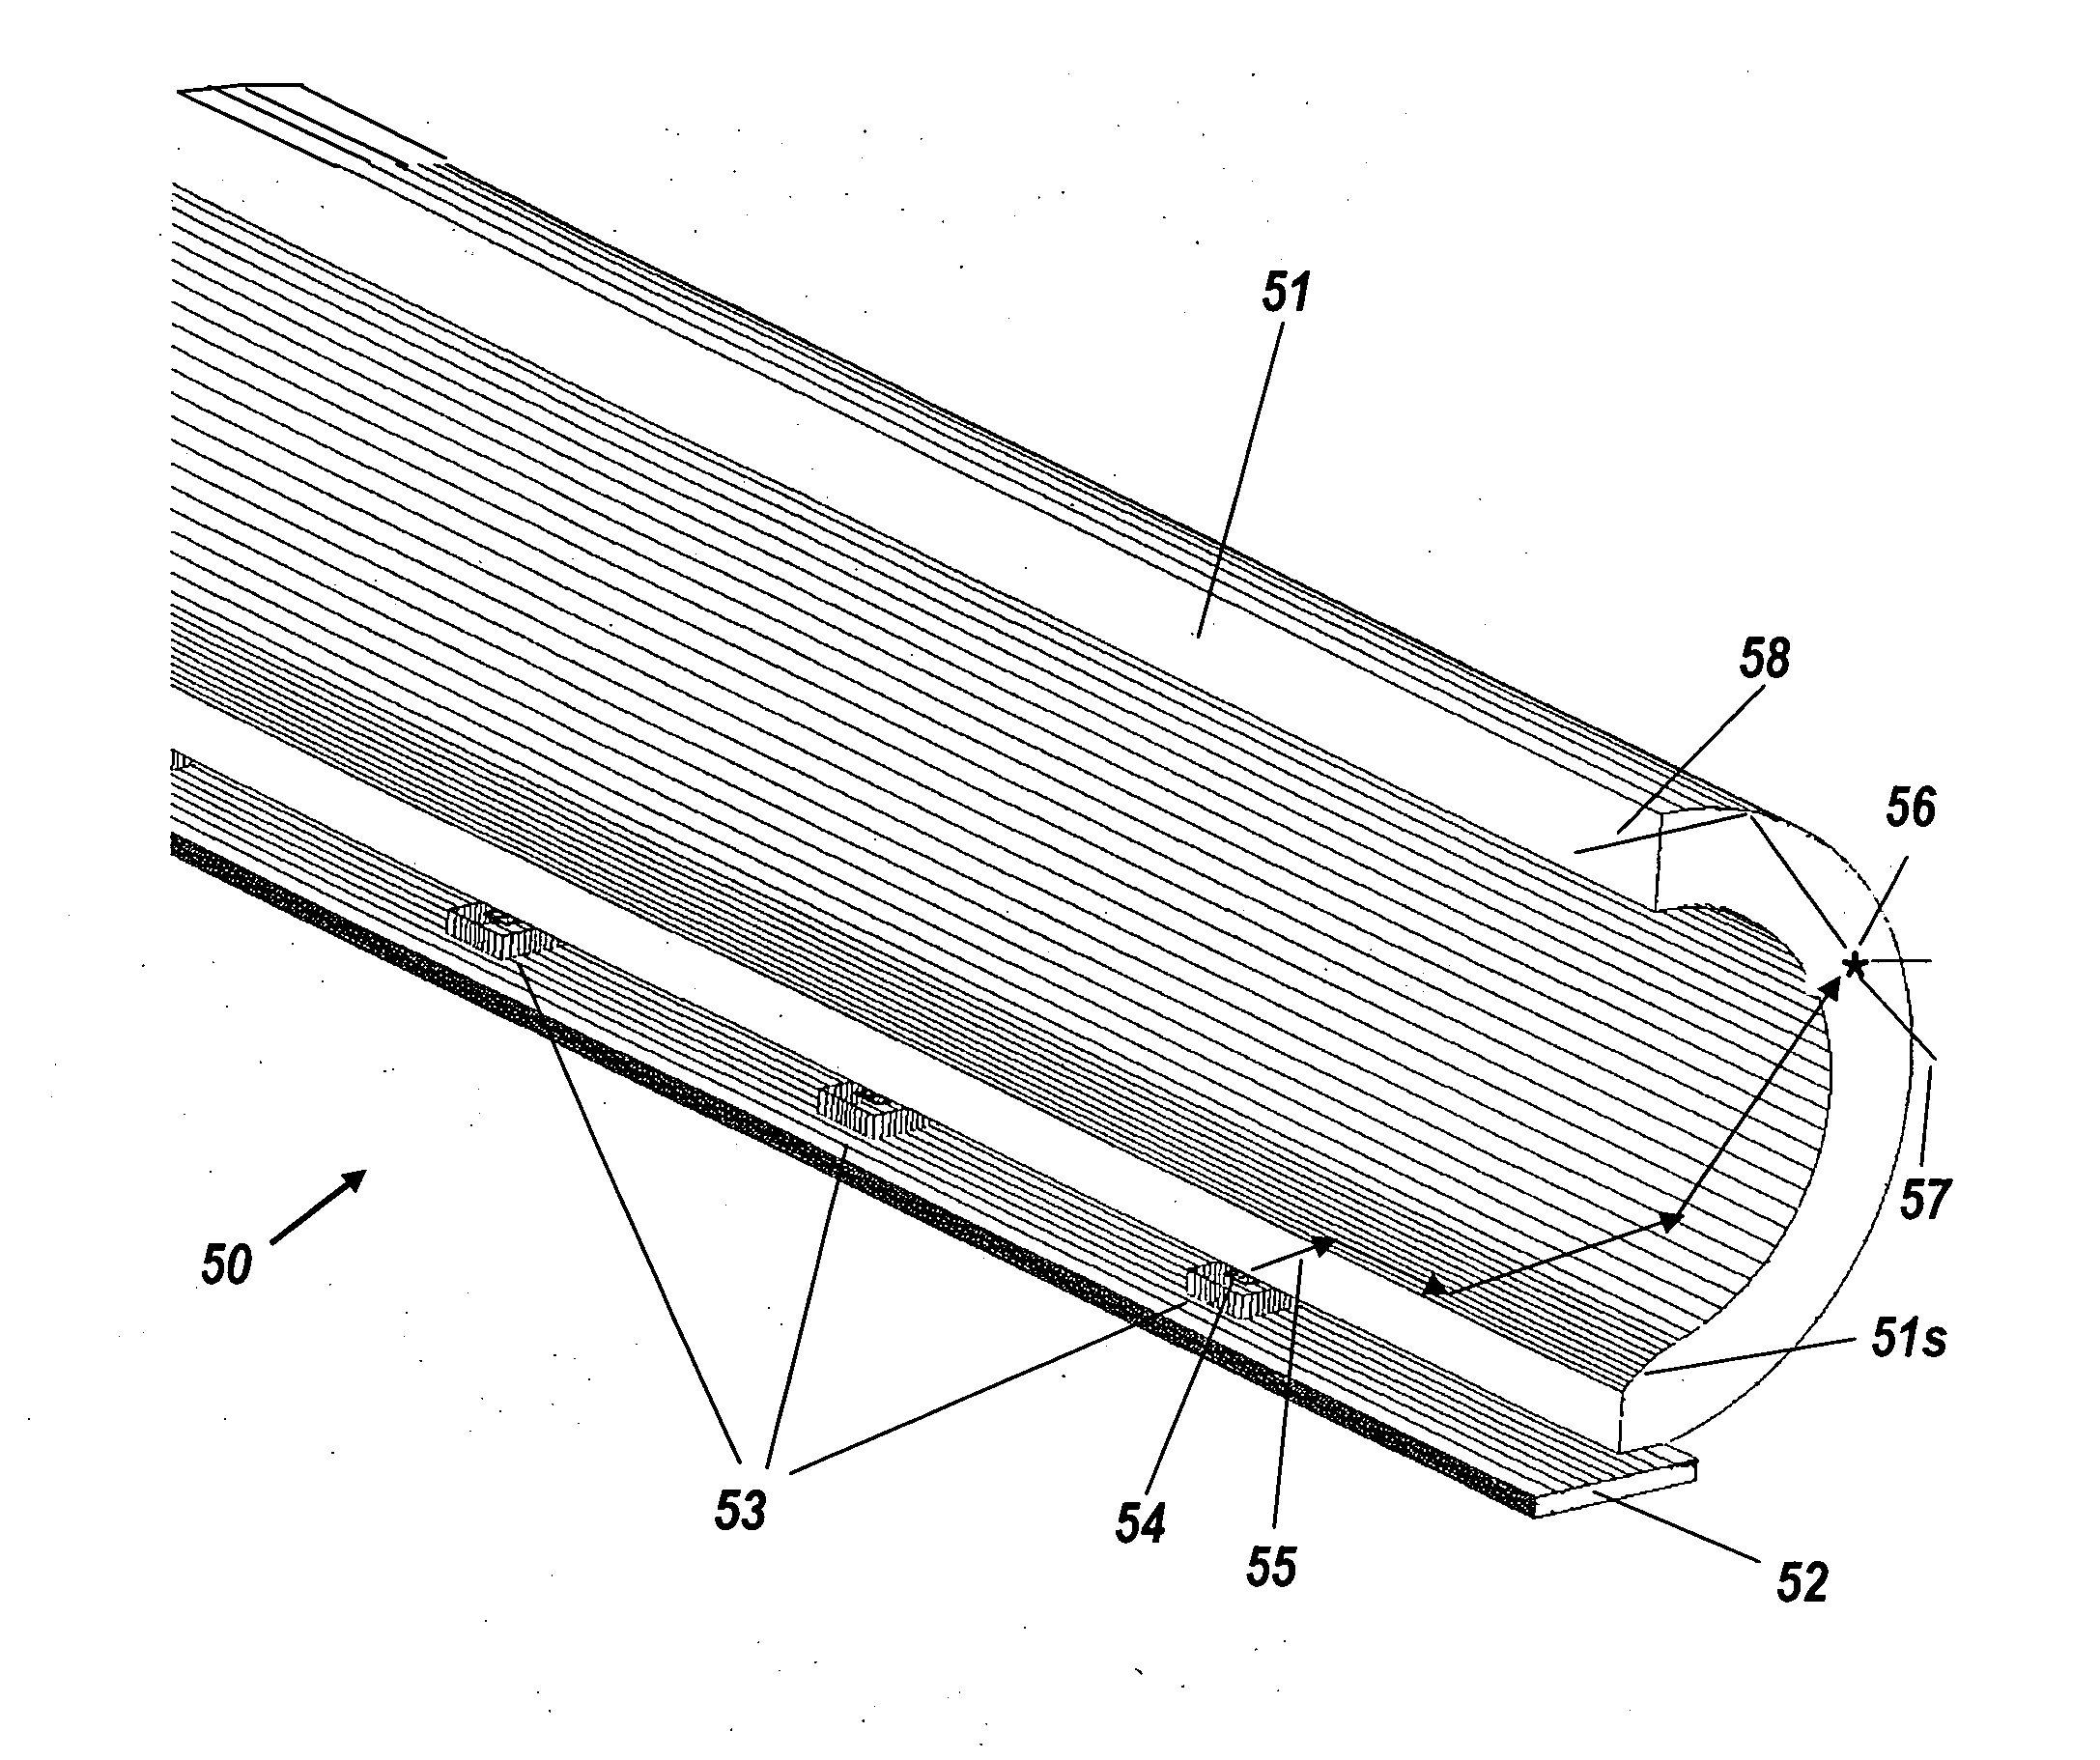 Neon-tube substitute using light-emitting diodes